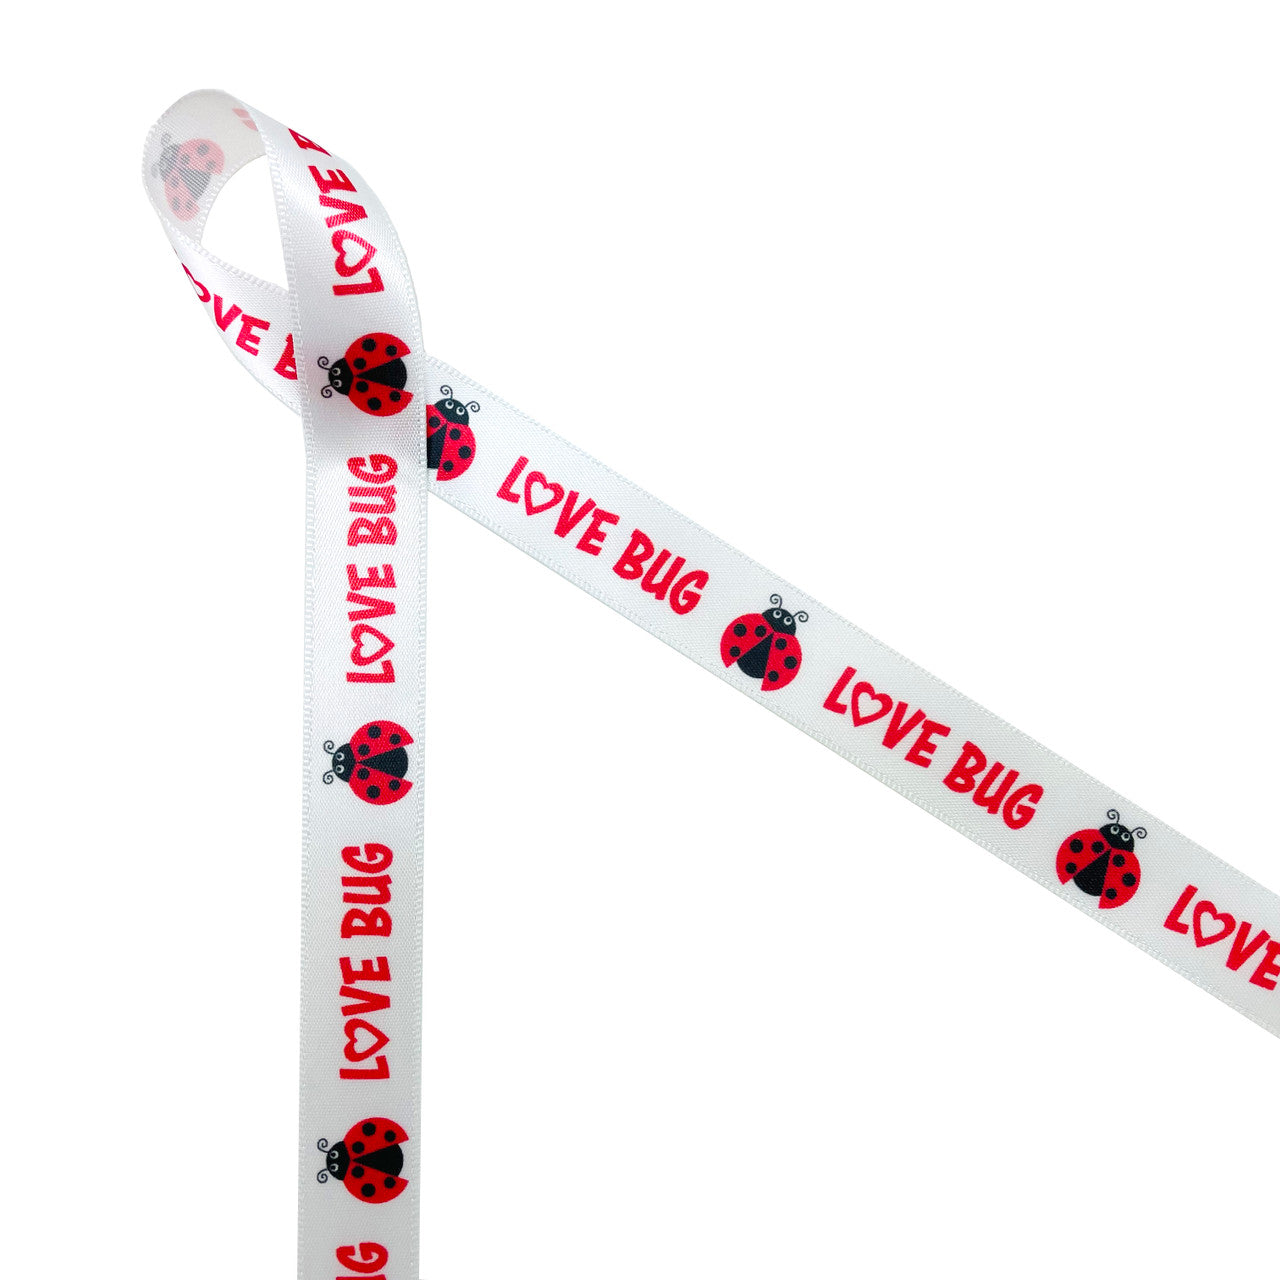 Ladybugs and Love bugs in red printed on 5/8"white single face satin ribbon is a fun ribbon for Valentine celebrations! This adorable ribbon is sweet for juvenile and adult celebrations alike. Tie this ribbon on Valentine gifts, gift baskets, Valentine favors, cookies and cake pops. This is a great craft ribbon for Valentine sewing, quilting and paper crafts. All our ribbon is designed and printed in the USA